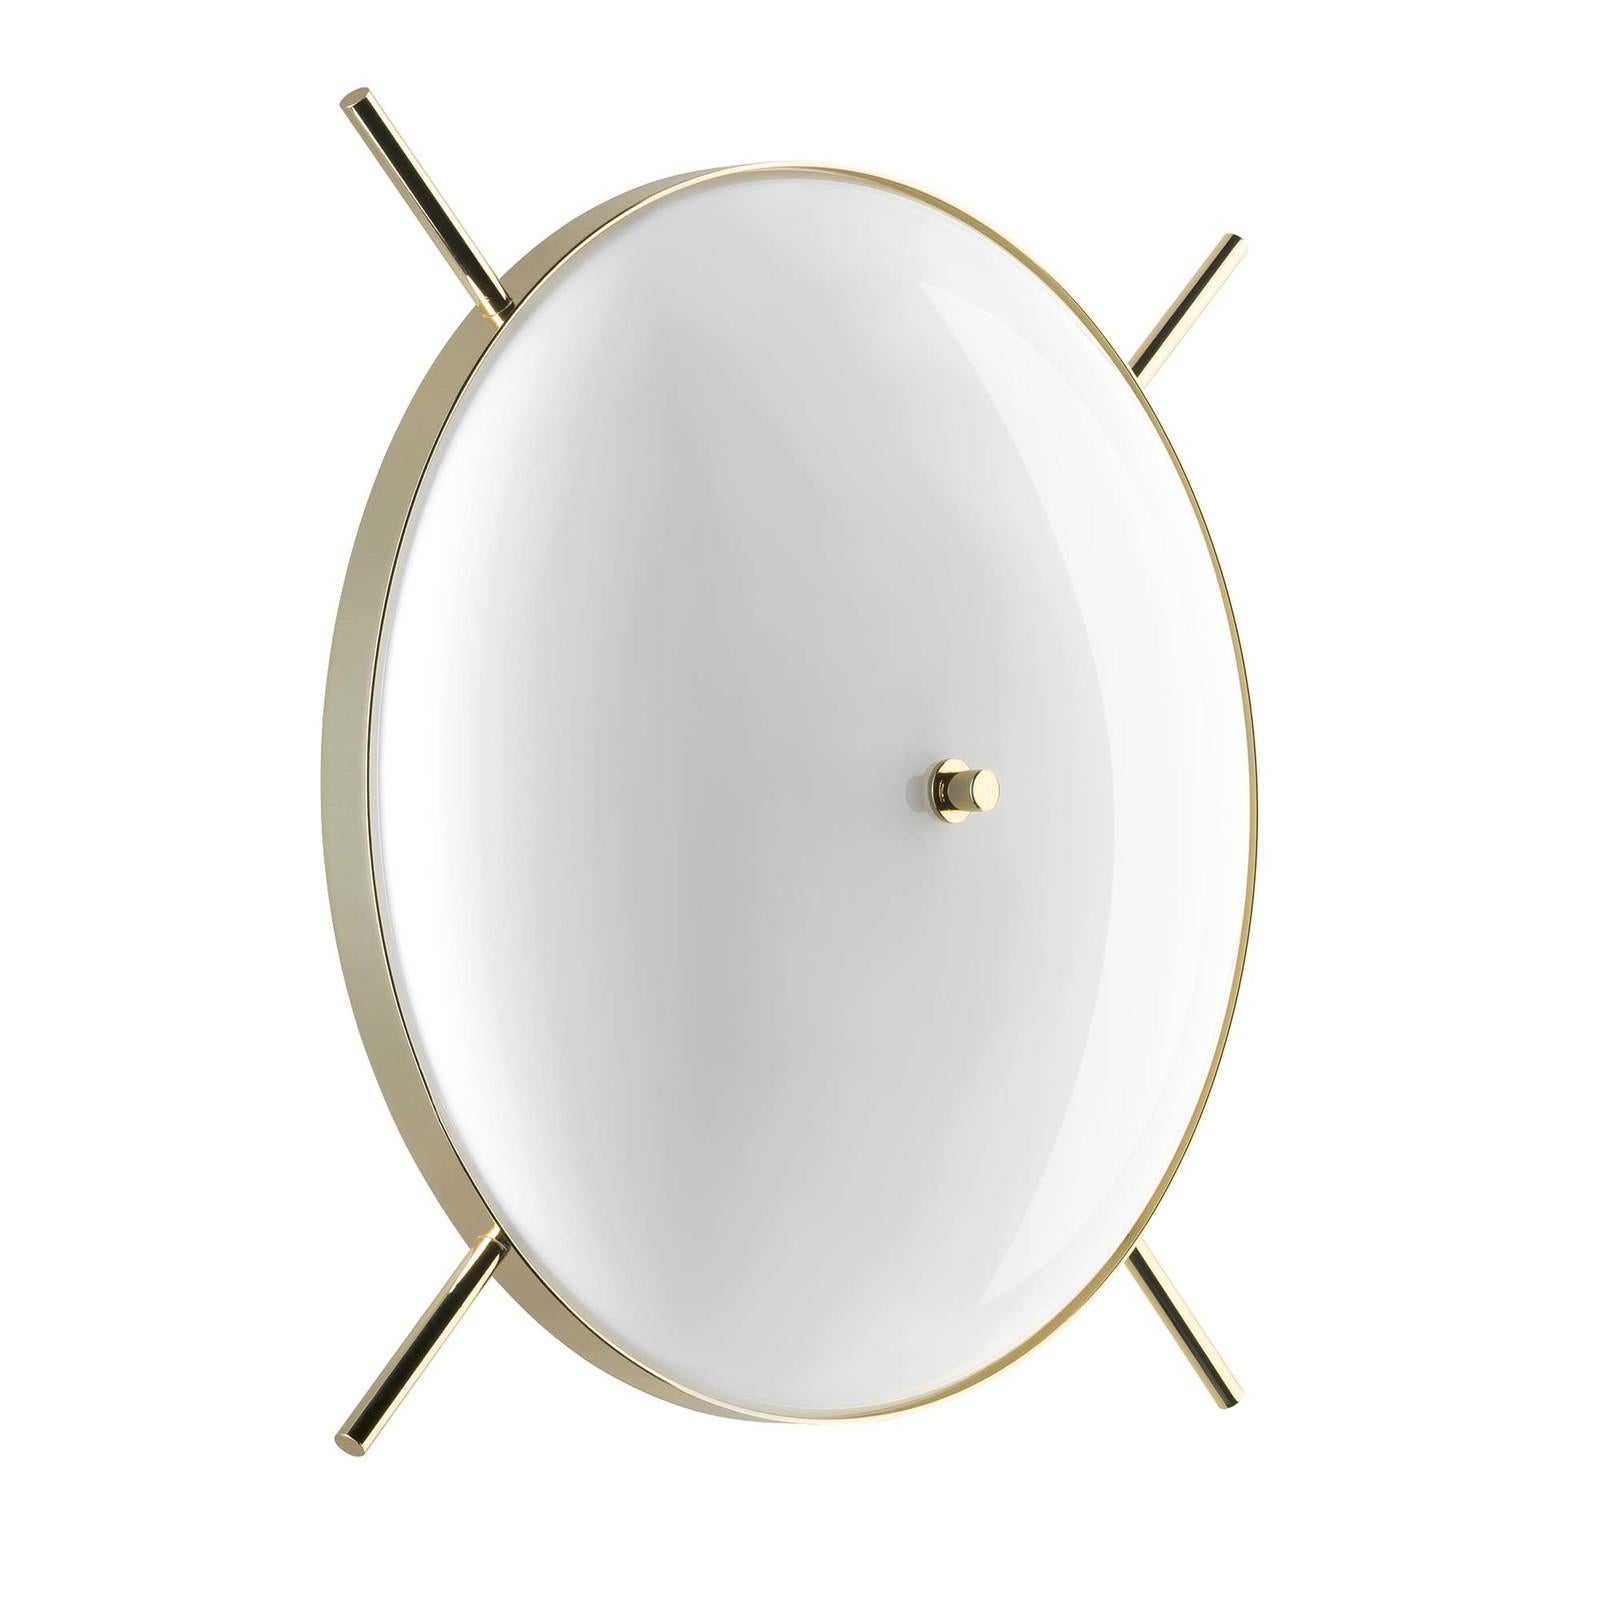 Either alone or paired with the Venusia small sconce, this exquisite wall lamp, part of the Home Couture collection, will enliven the texture of a wall while providing an elegant interior with warm light. The structure in brass combines a ring and